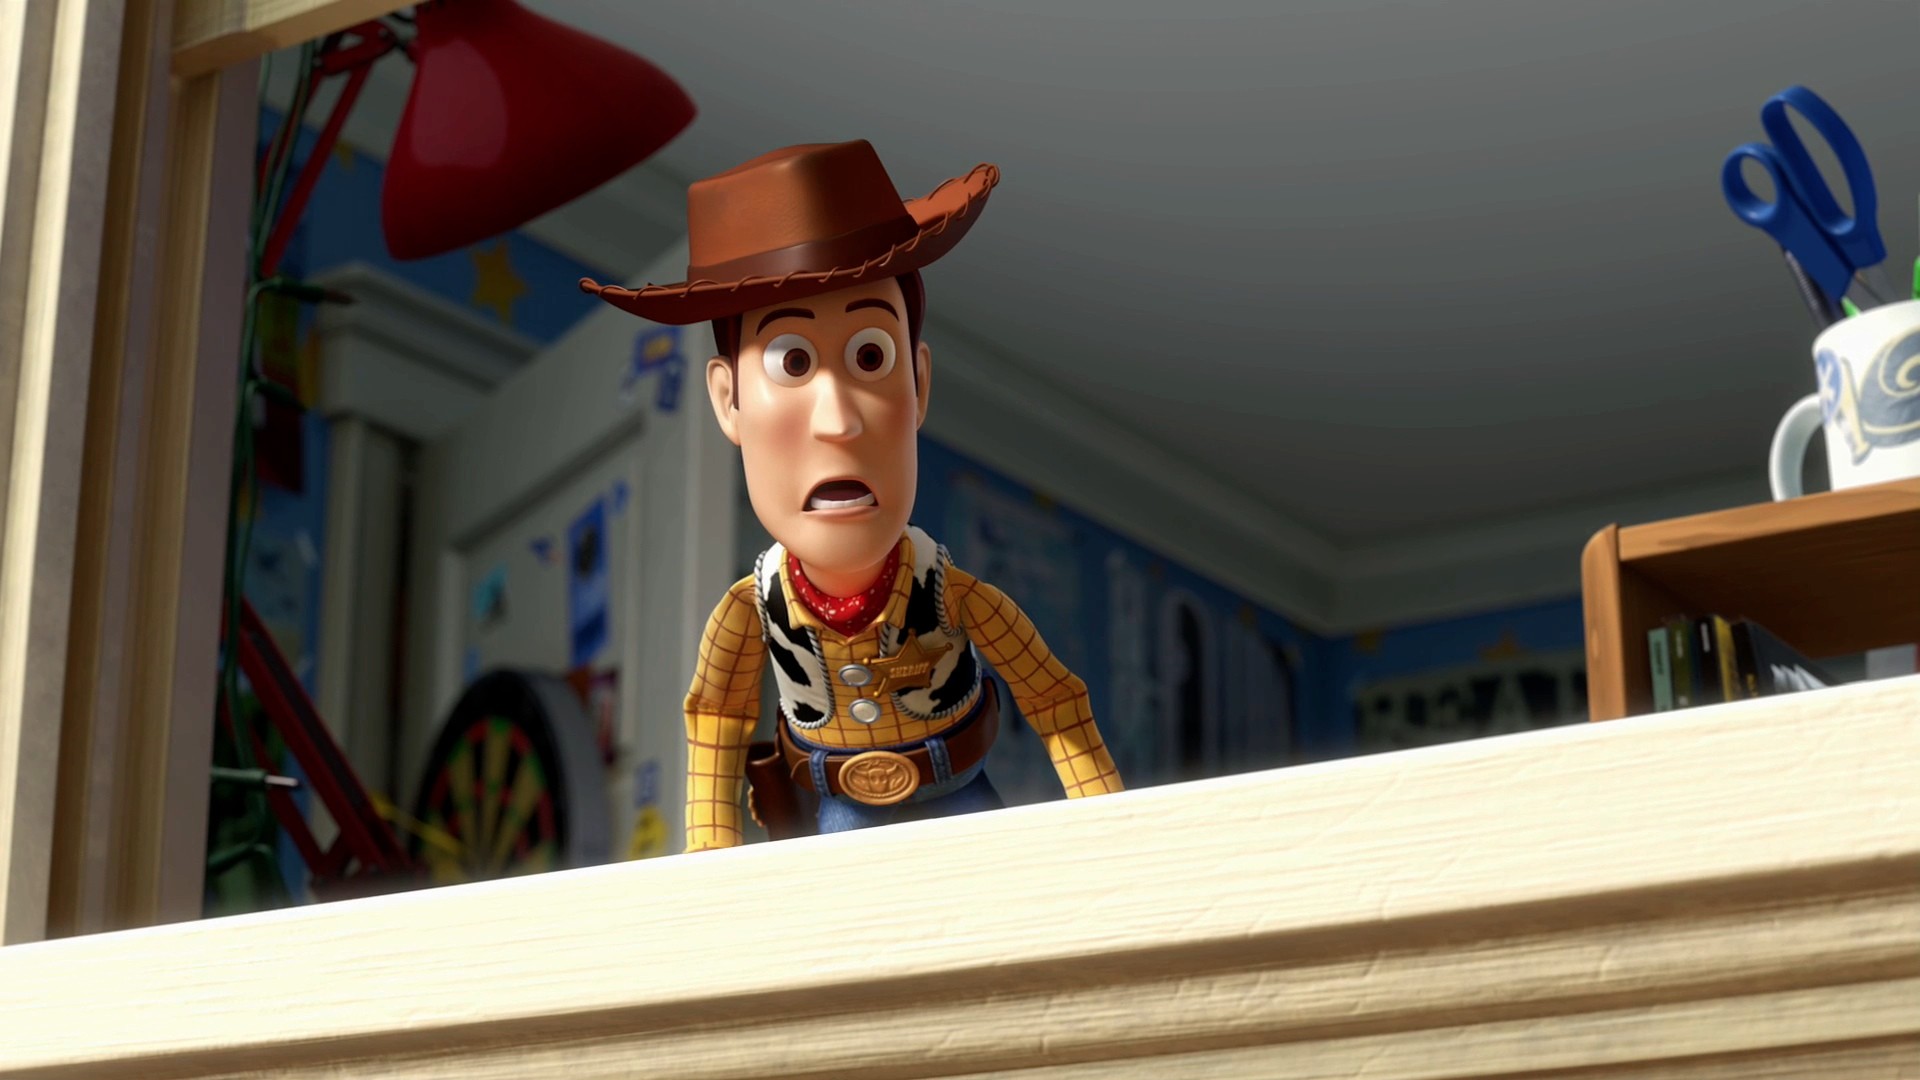 movies, Toy Story Wallpaper